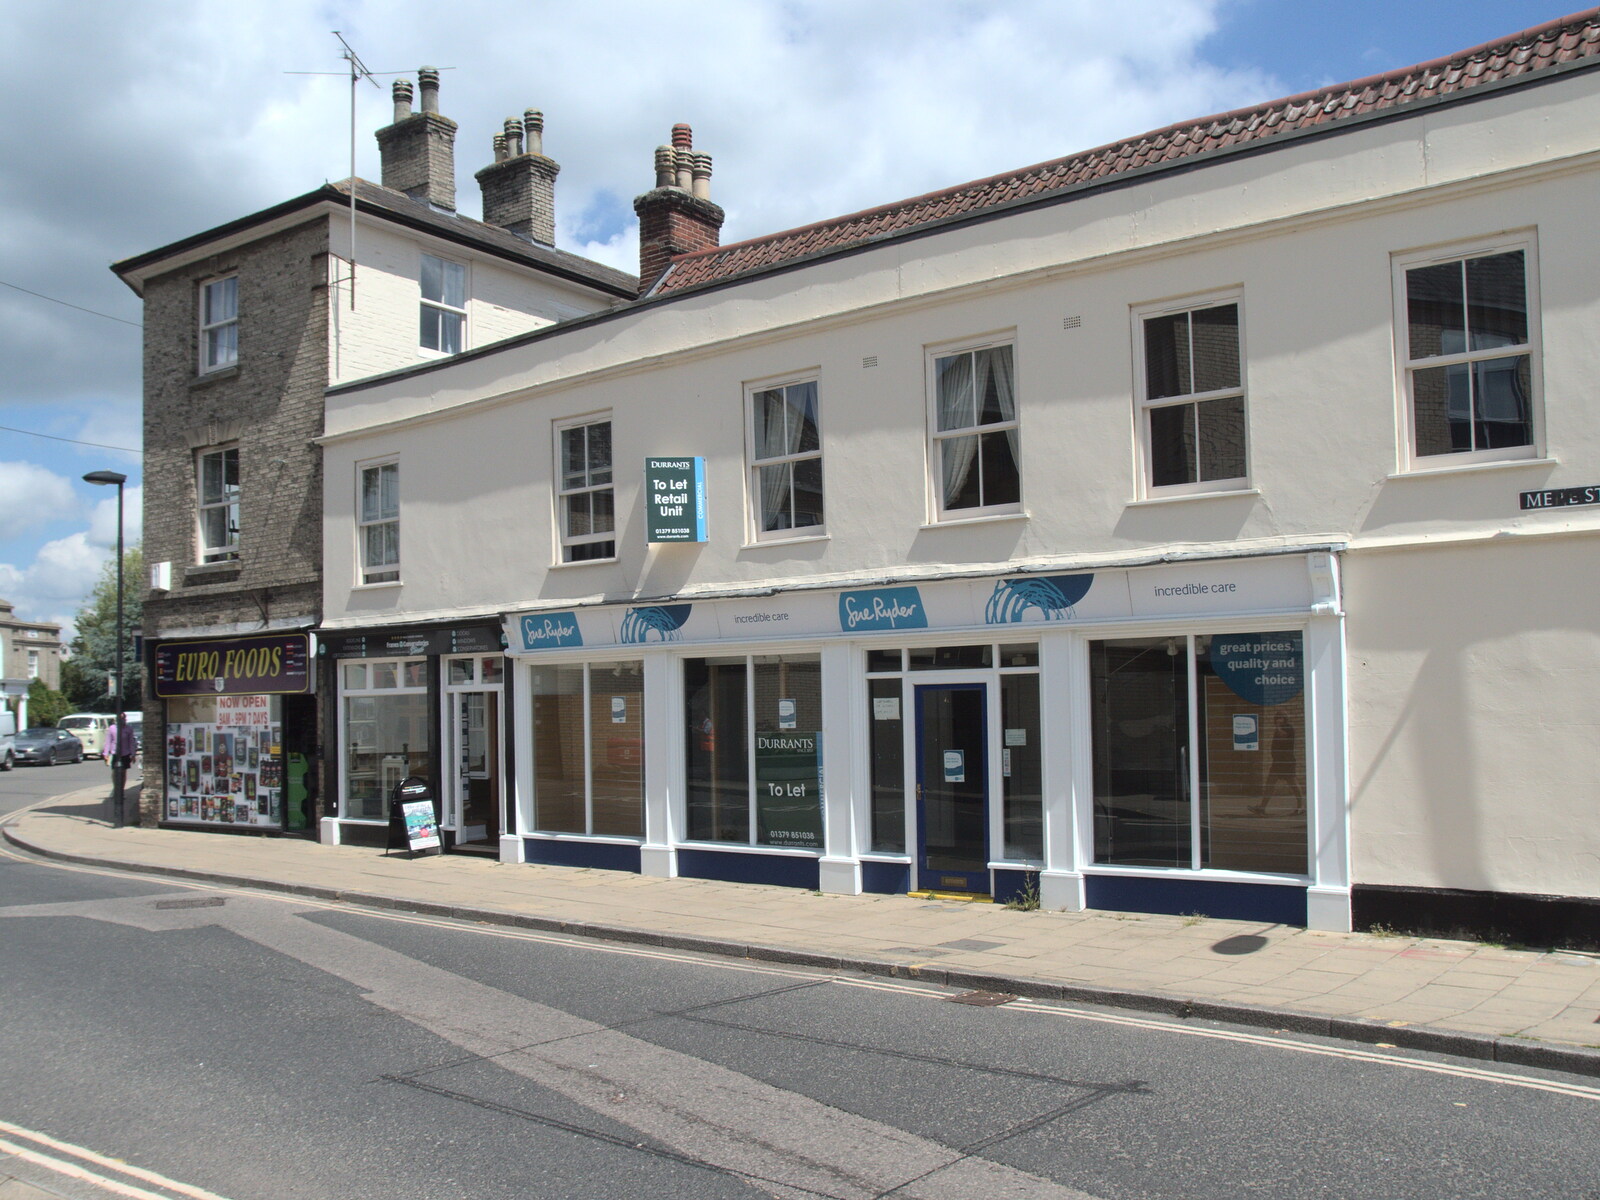 Sue Ryder in Diss has packed it all in from A Visit to the Kittens, Scarning, Norfolk - 13th June 2021